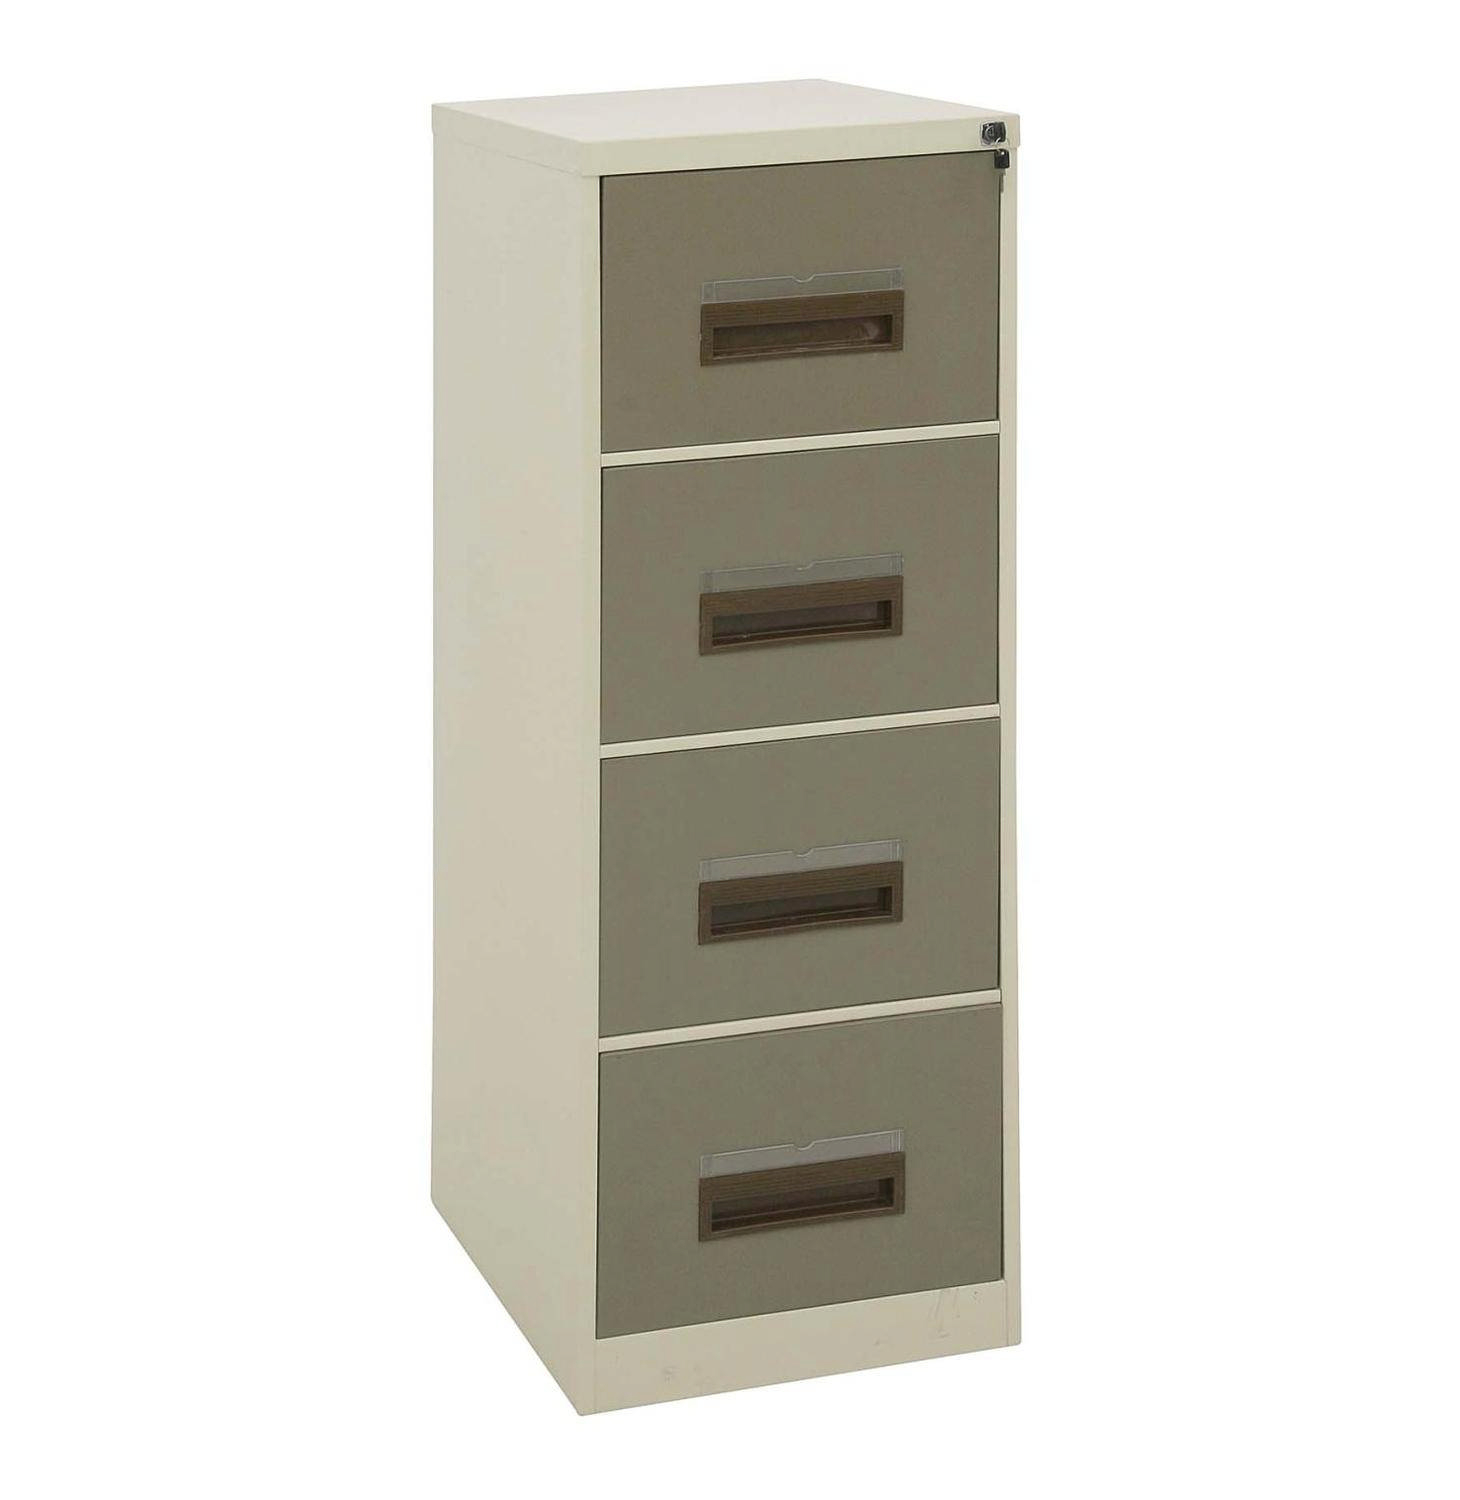 File Cabinets Astounding 4 Drawer File Cabinet Metal Wardrobe in size 1460 X 1500